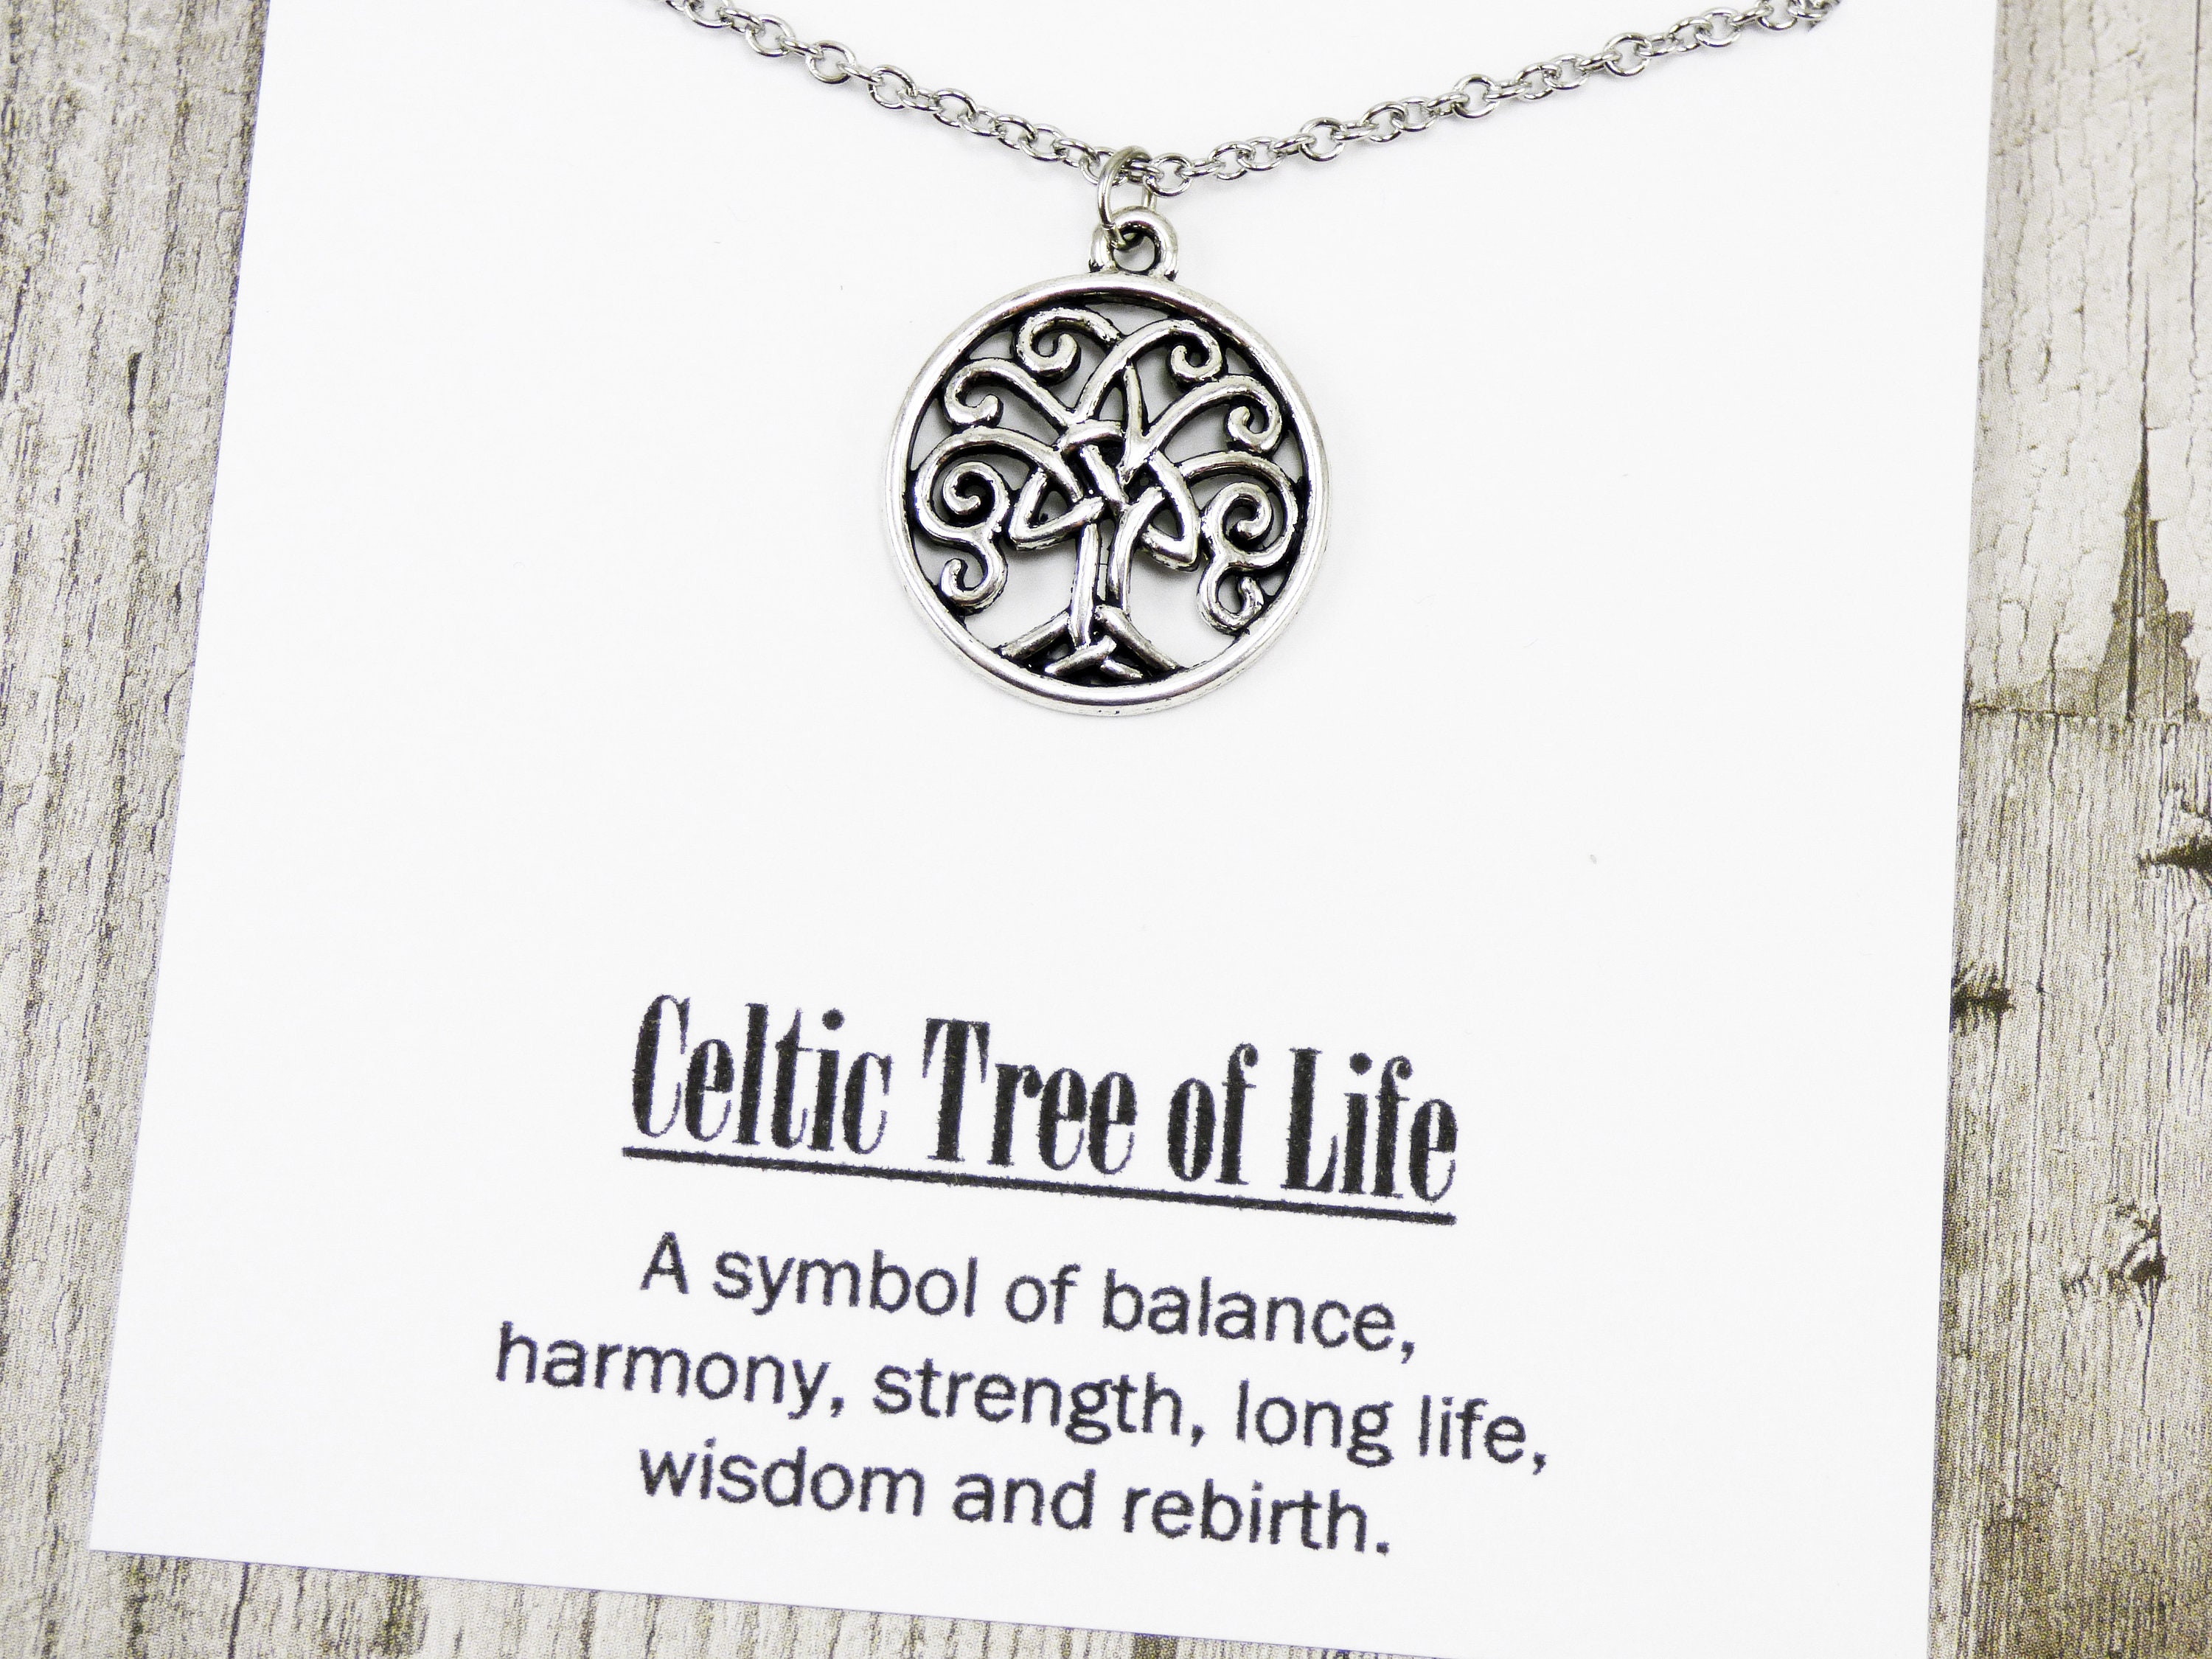 Avalon Tree of Life Necklace – Celtic Crystal Design Jewelry